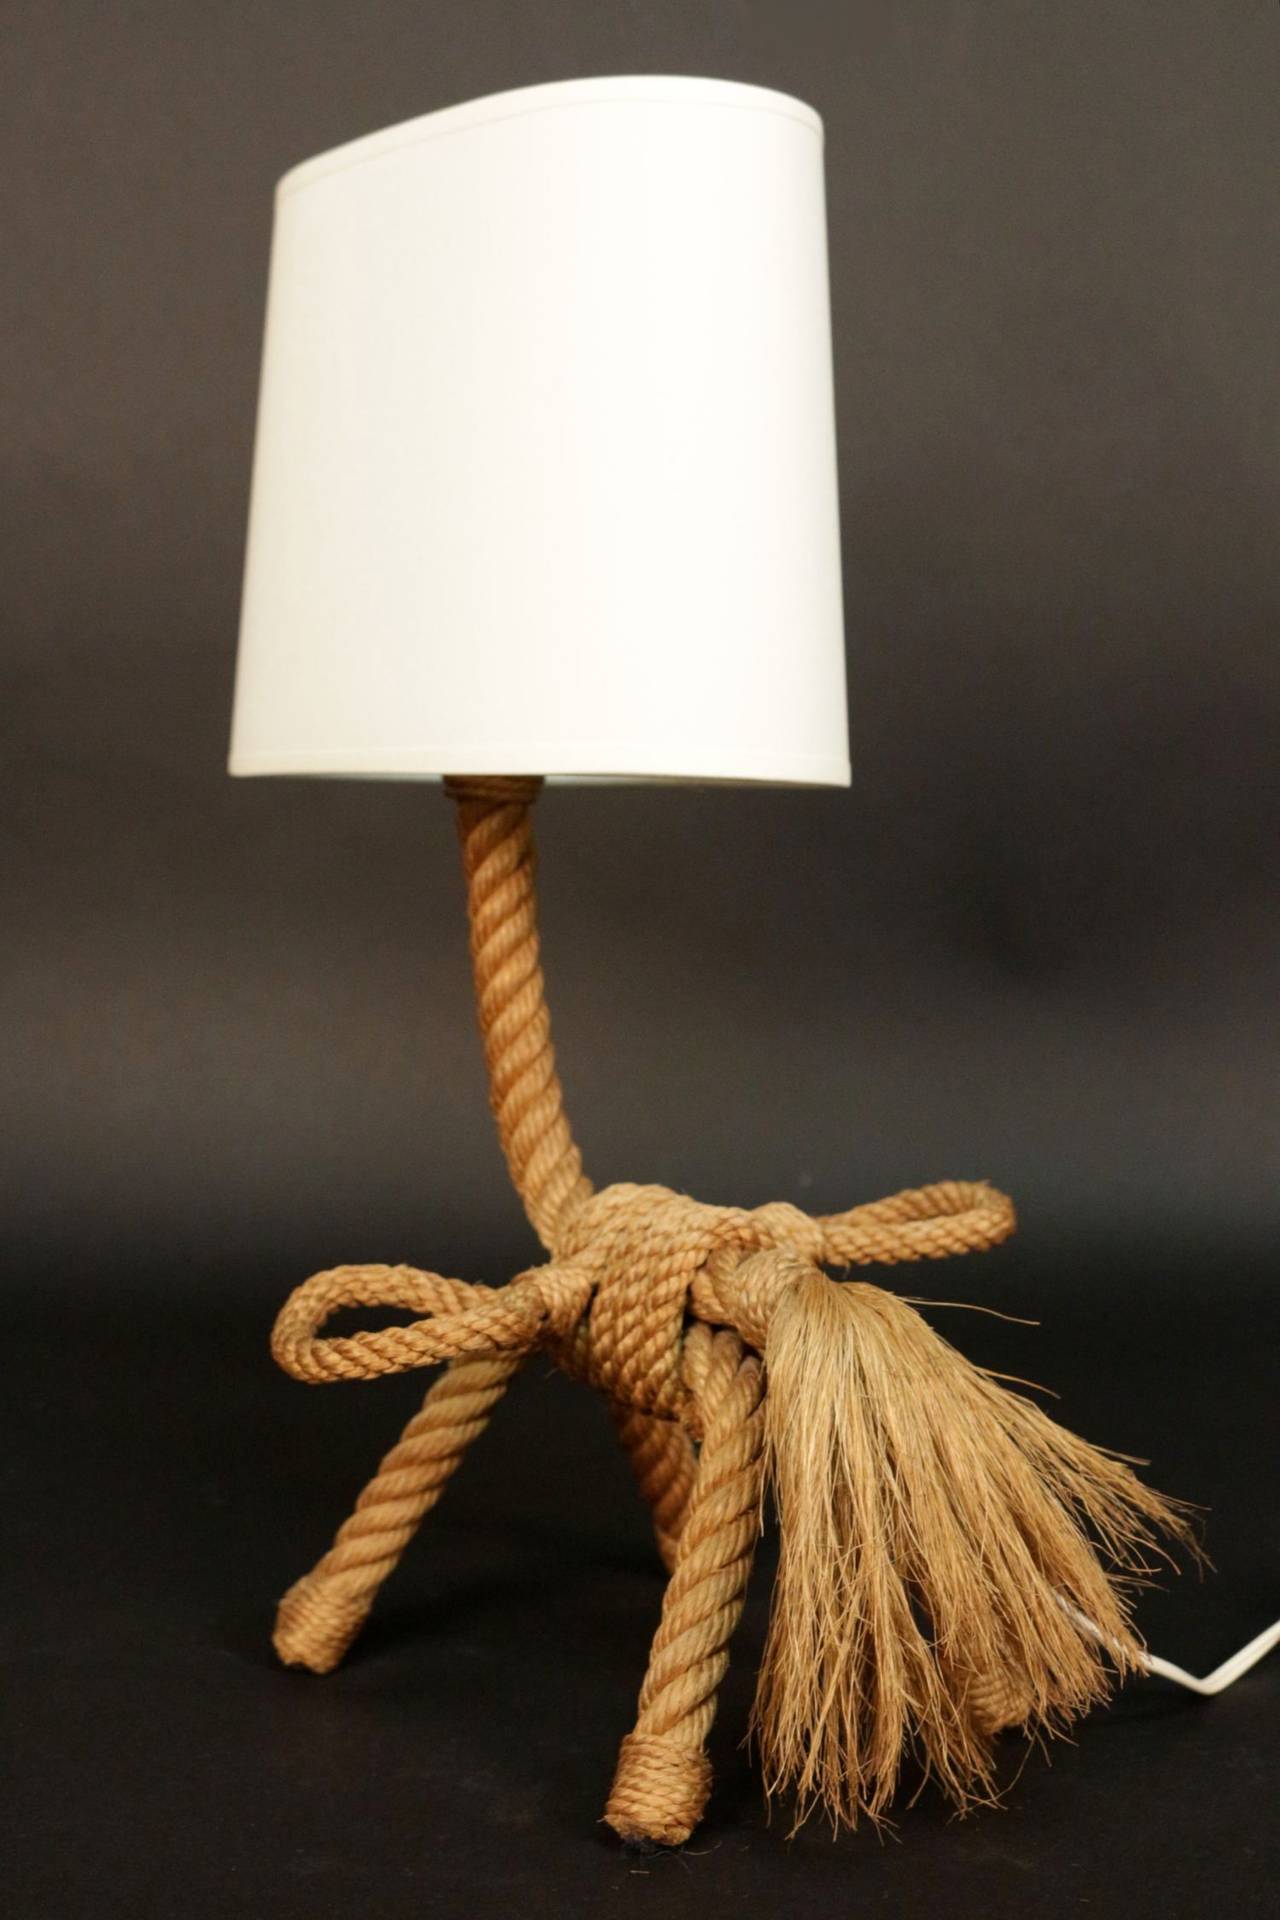 Pair of 1950s 'Small Horse' table lamps by Adrien Audoux and Frida Minet in rope.

Hemp plumed tail adorned with two small rope baskets. One lighted arm and new lamp shade.